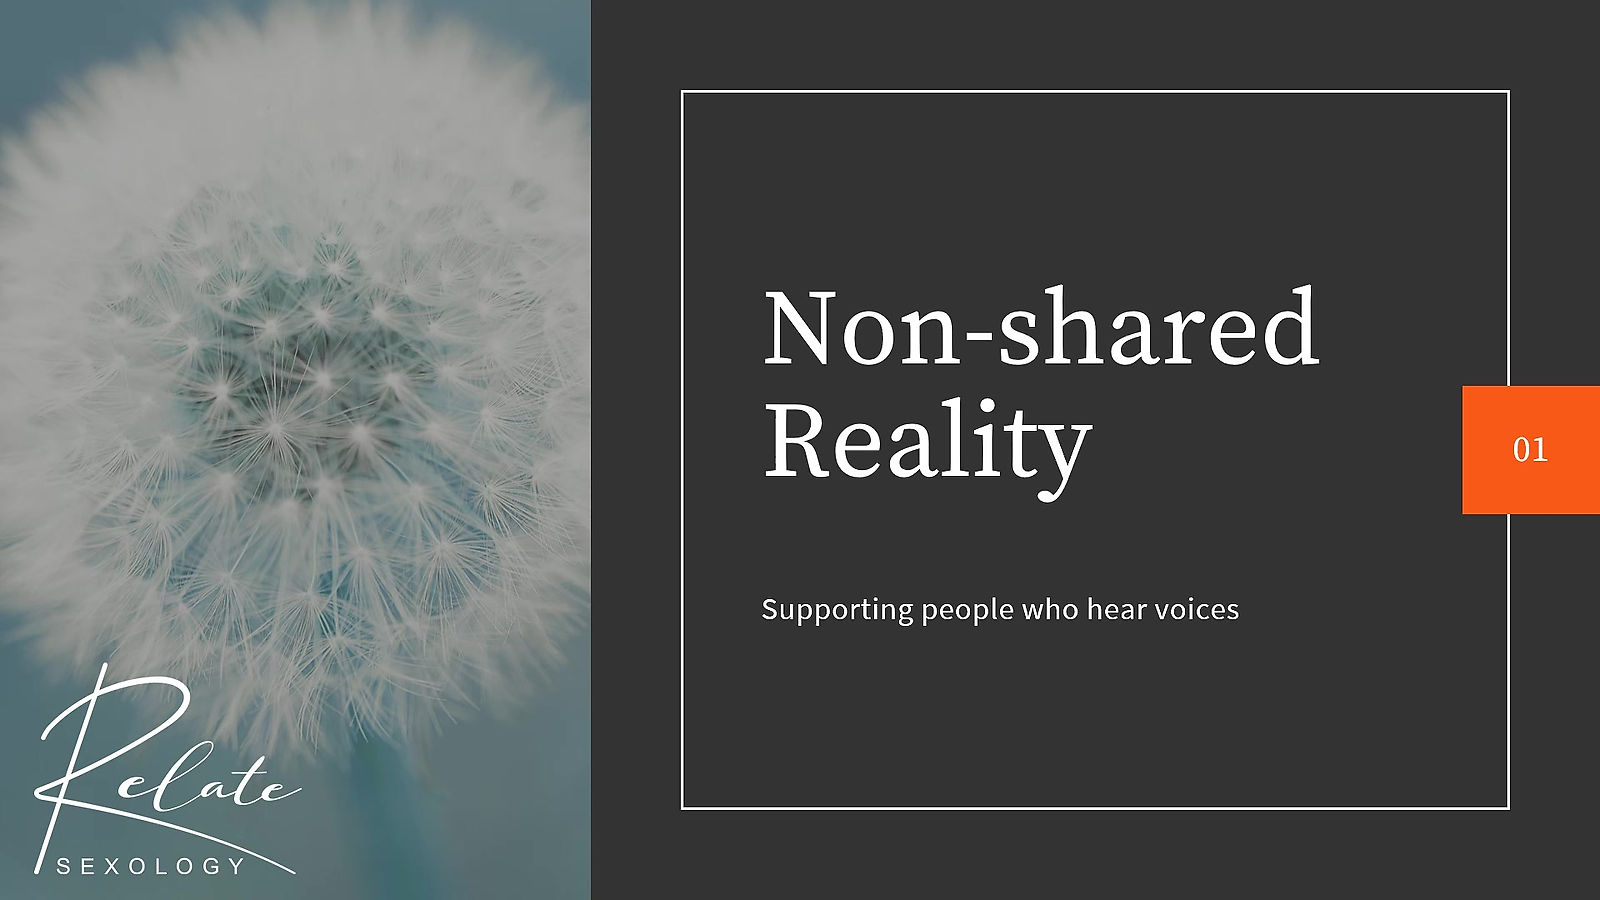 Non-shared reality